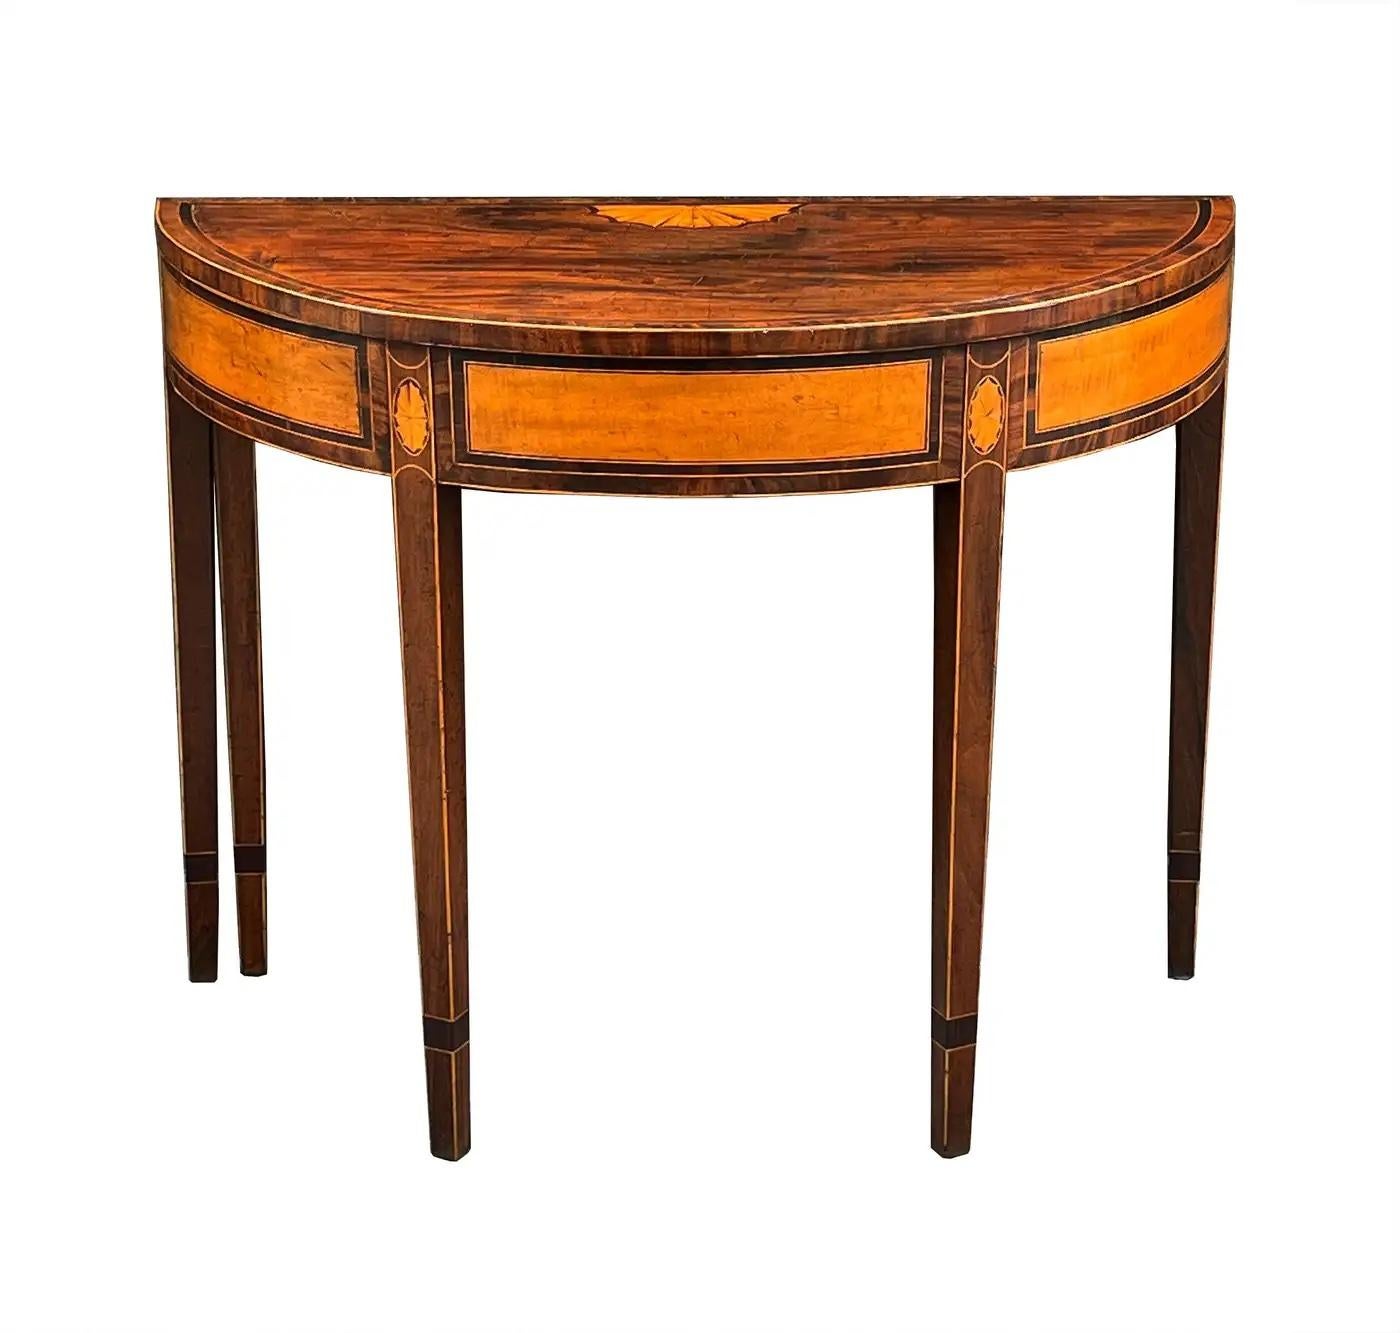 A stunning pair of 18th century Georgian mahogany and satinwood inlaid demilunes. Beautifully figured mahogany lipped console tops with cross-banded edges are supported by a frieze of satinwood panels and stringing of boxwood and ebony. The tops of